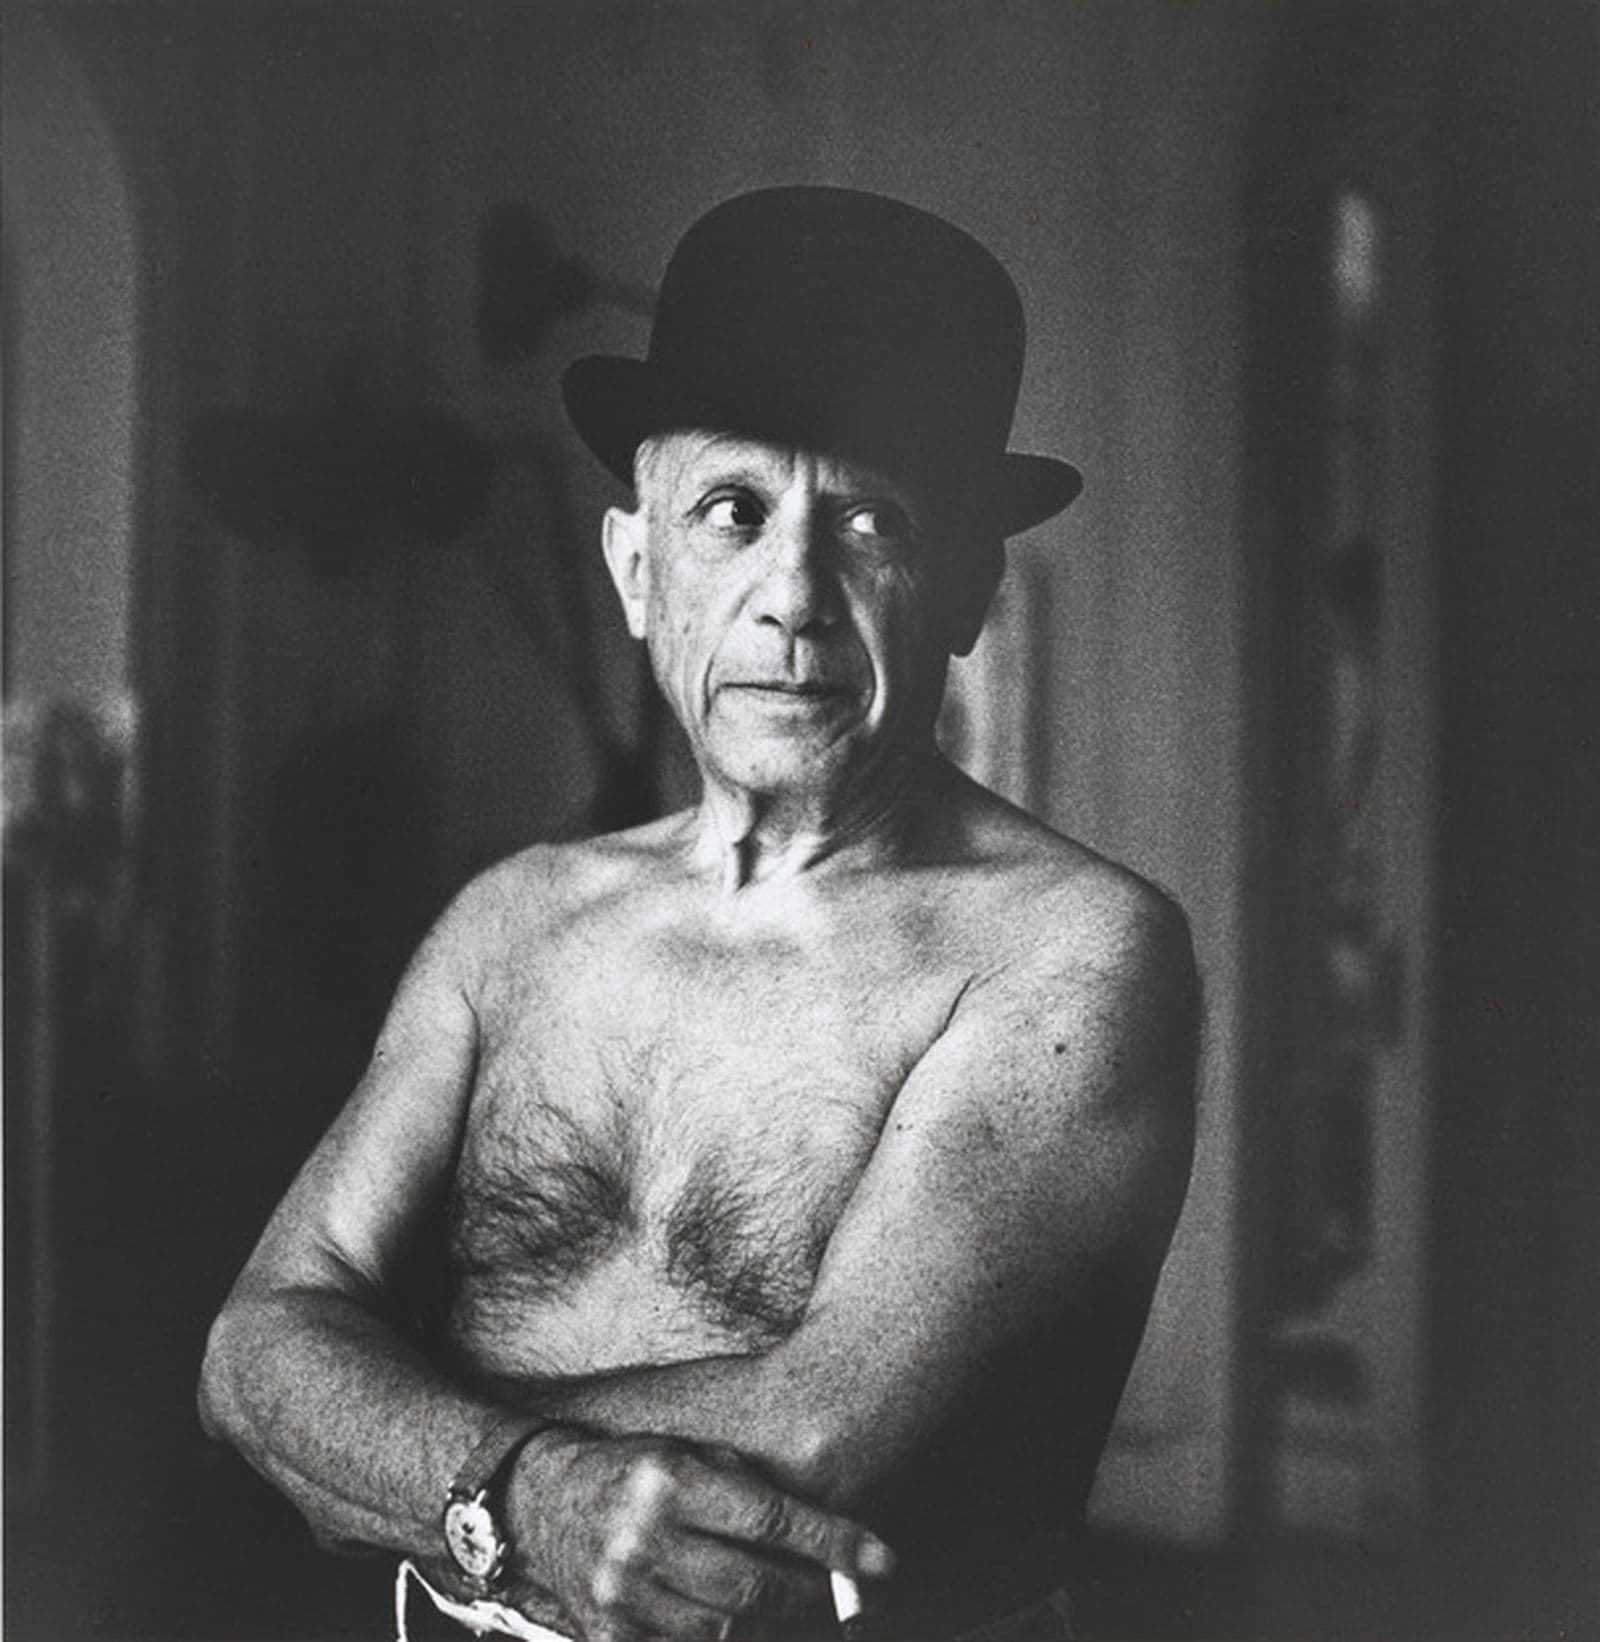 A photograph of a shirtless Picasso in a bowler hat smoking a cigarette.